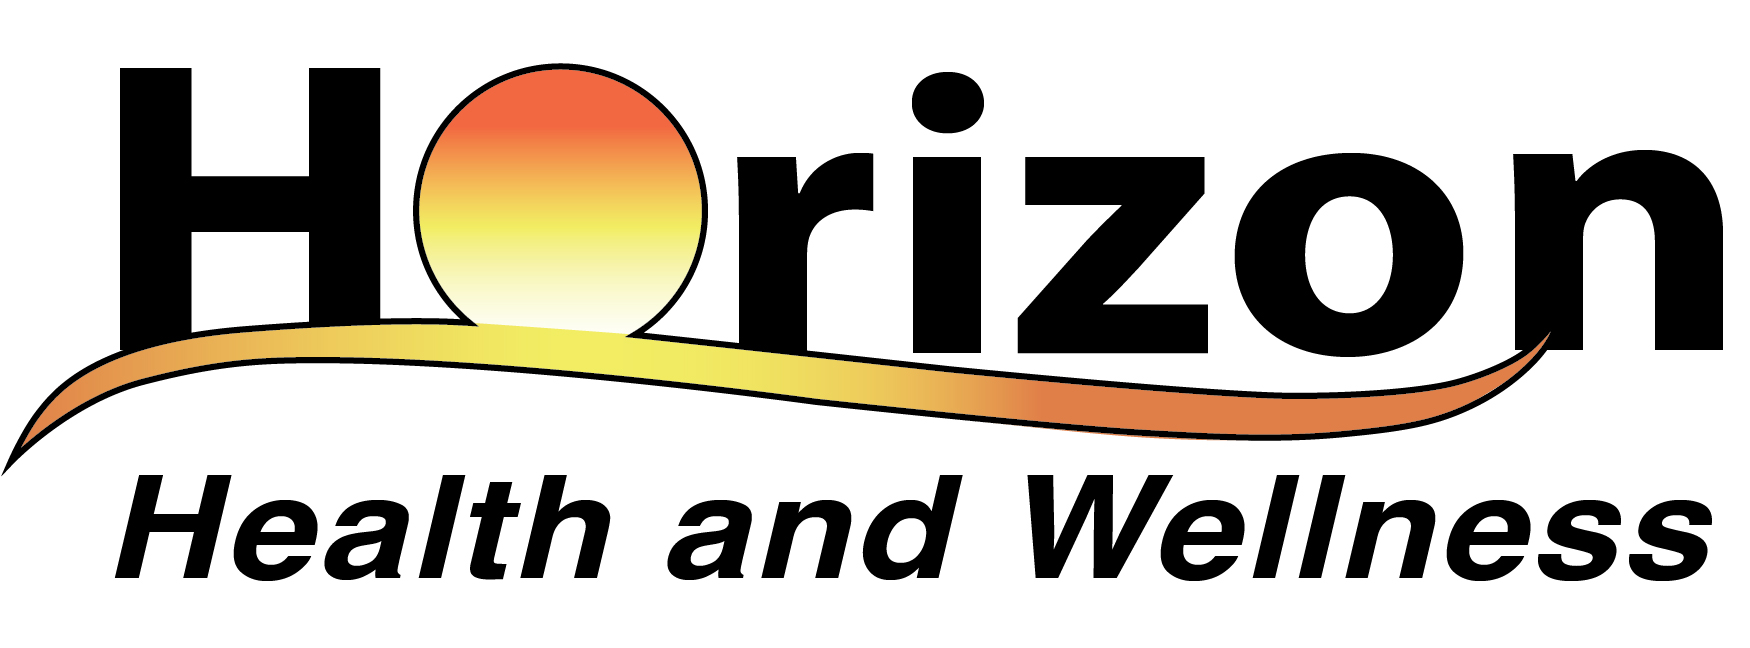 The JPG file of the Horizon Health and Wellness color logo.